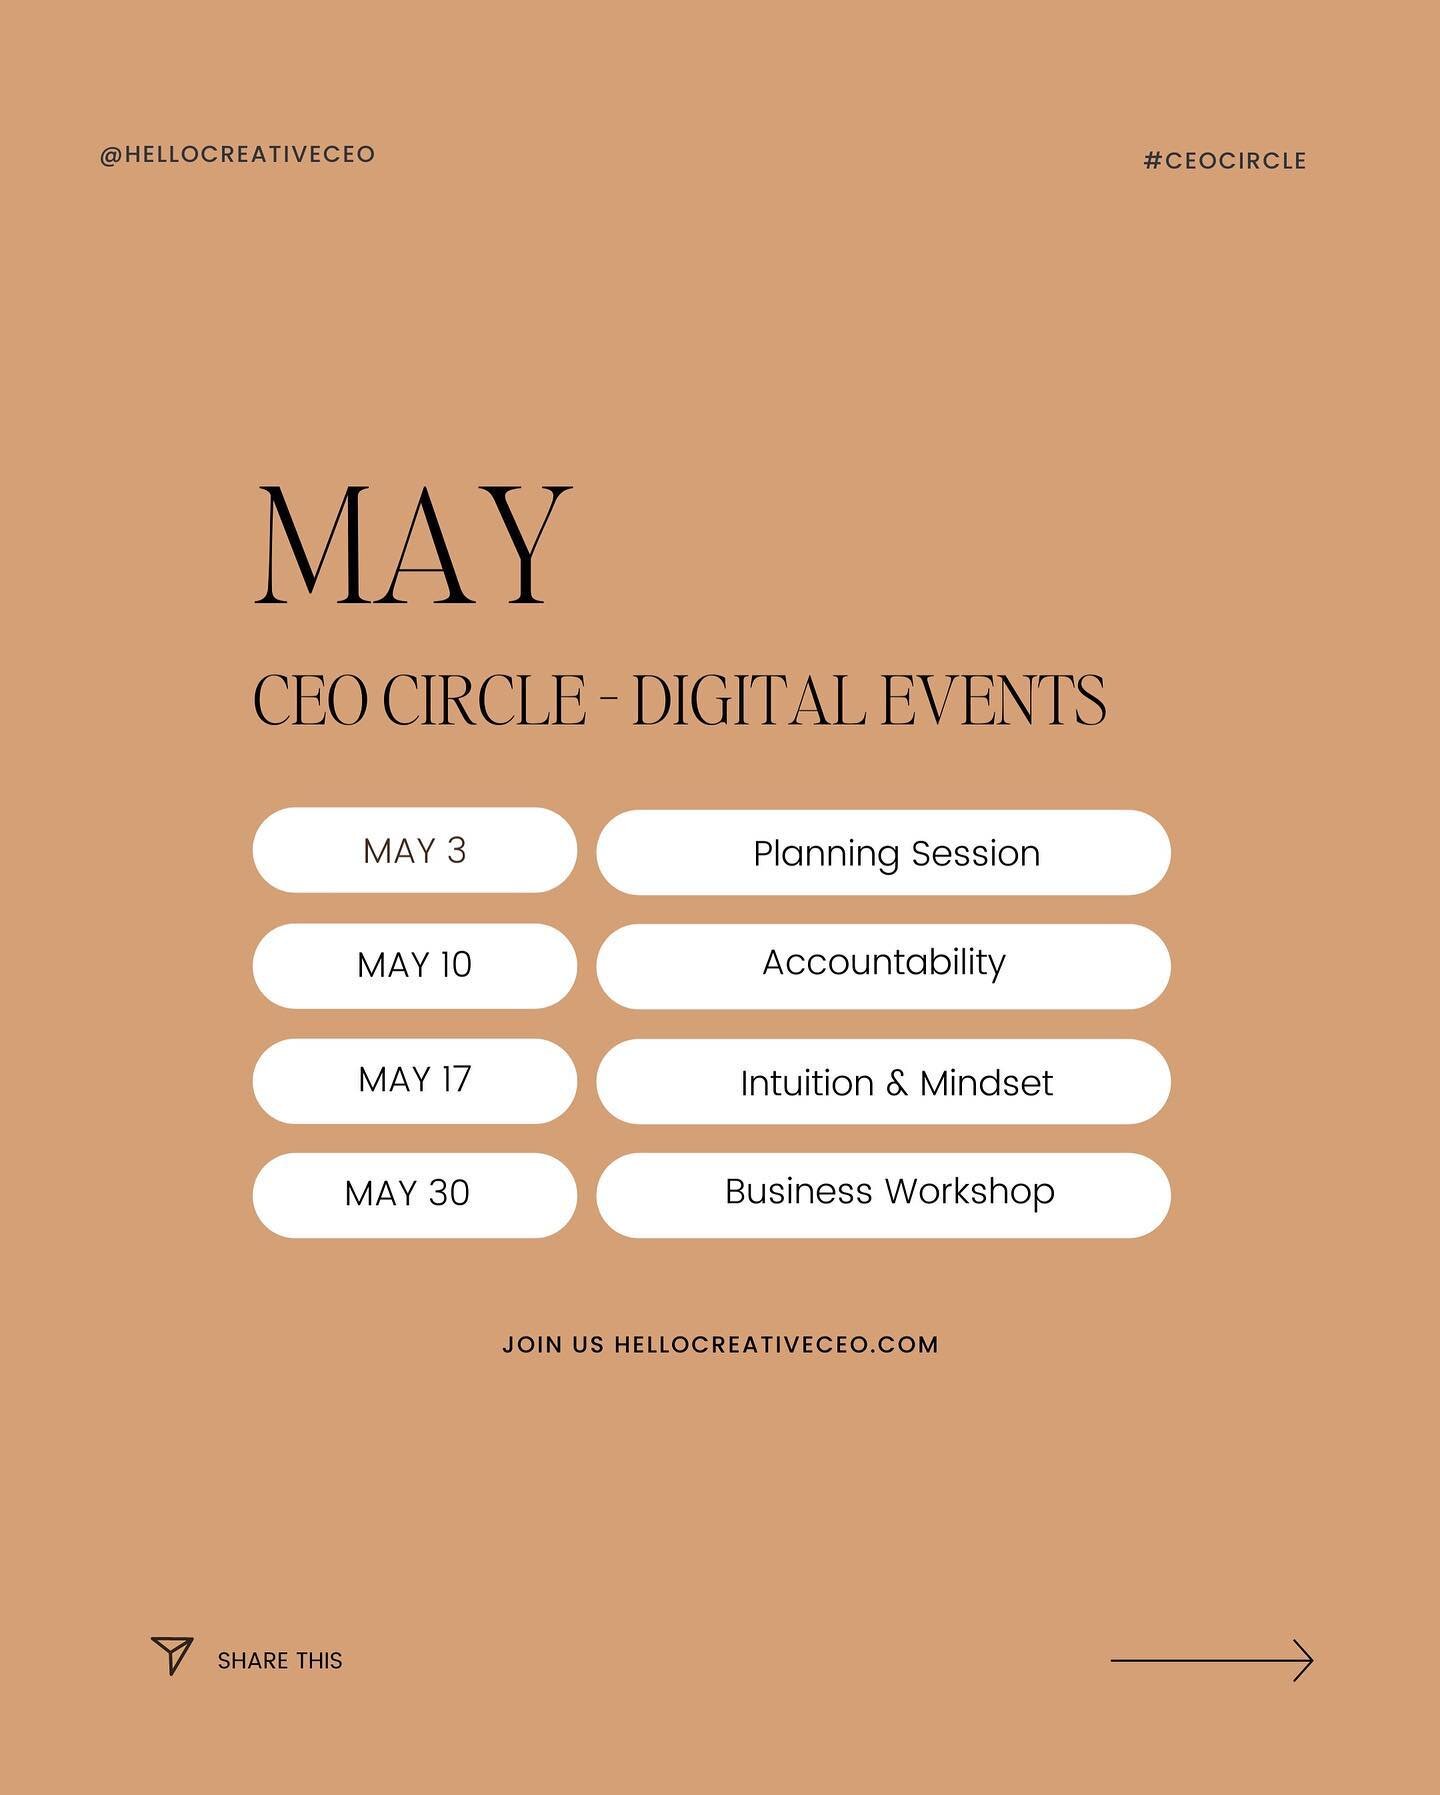 Join the CEO Circle. Step into a newfound sense of alignment and clarity for your business. ✨

Every Wednesday, we gather to discuss essential business topics that will reignite your passion and help you thrive in your business. This is a personalize